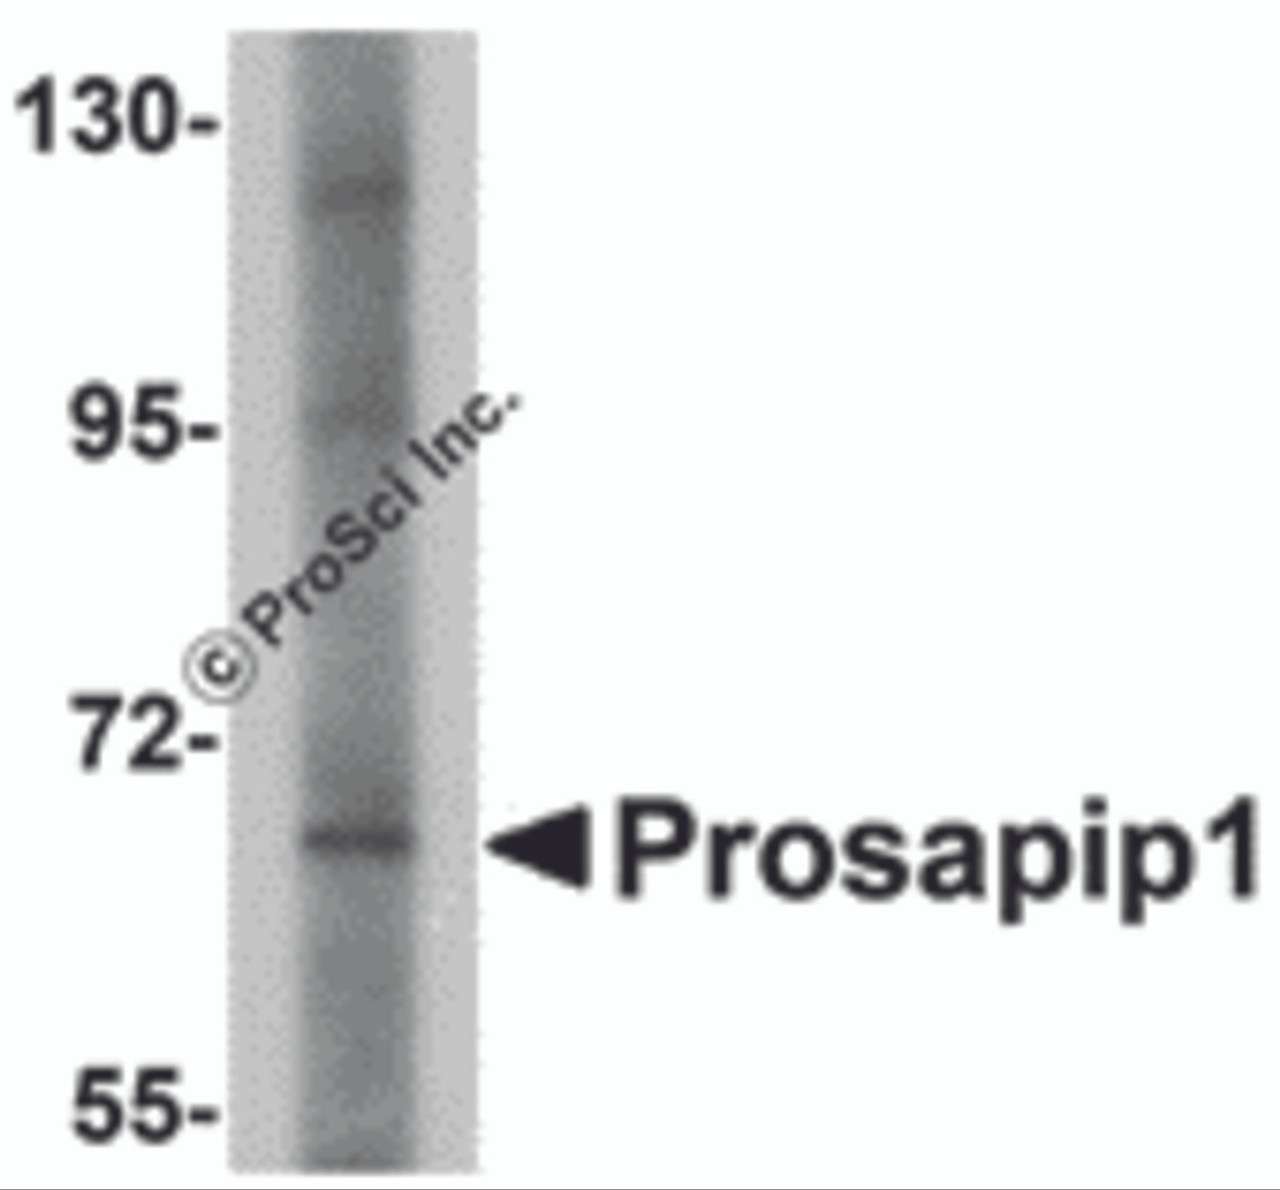 Western blot analysis of Prosapip1 in SK-N-SH cell lysate with Prosapip1 antibody at 1 &#956;g/mL.